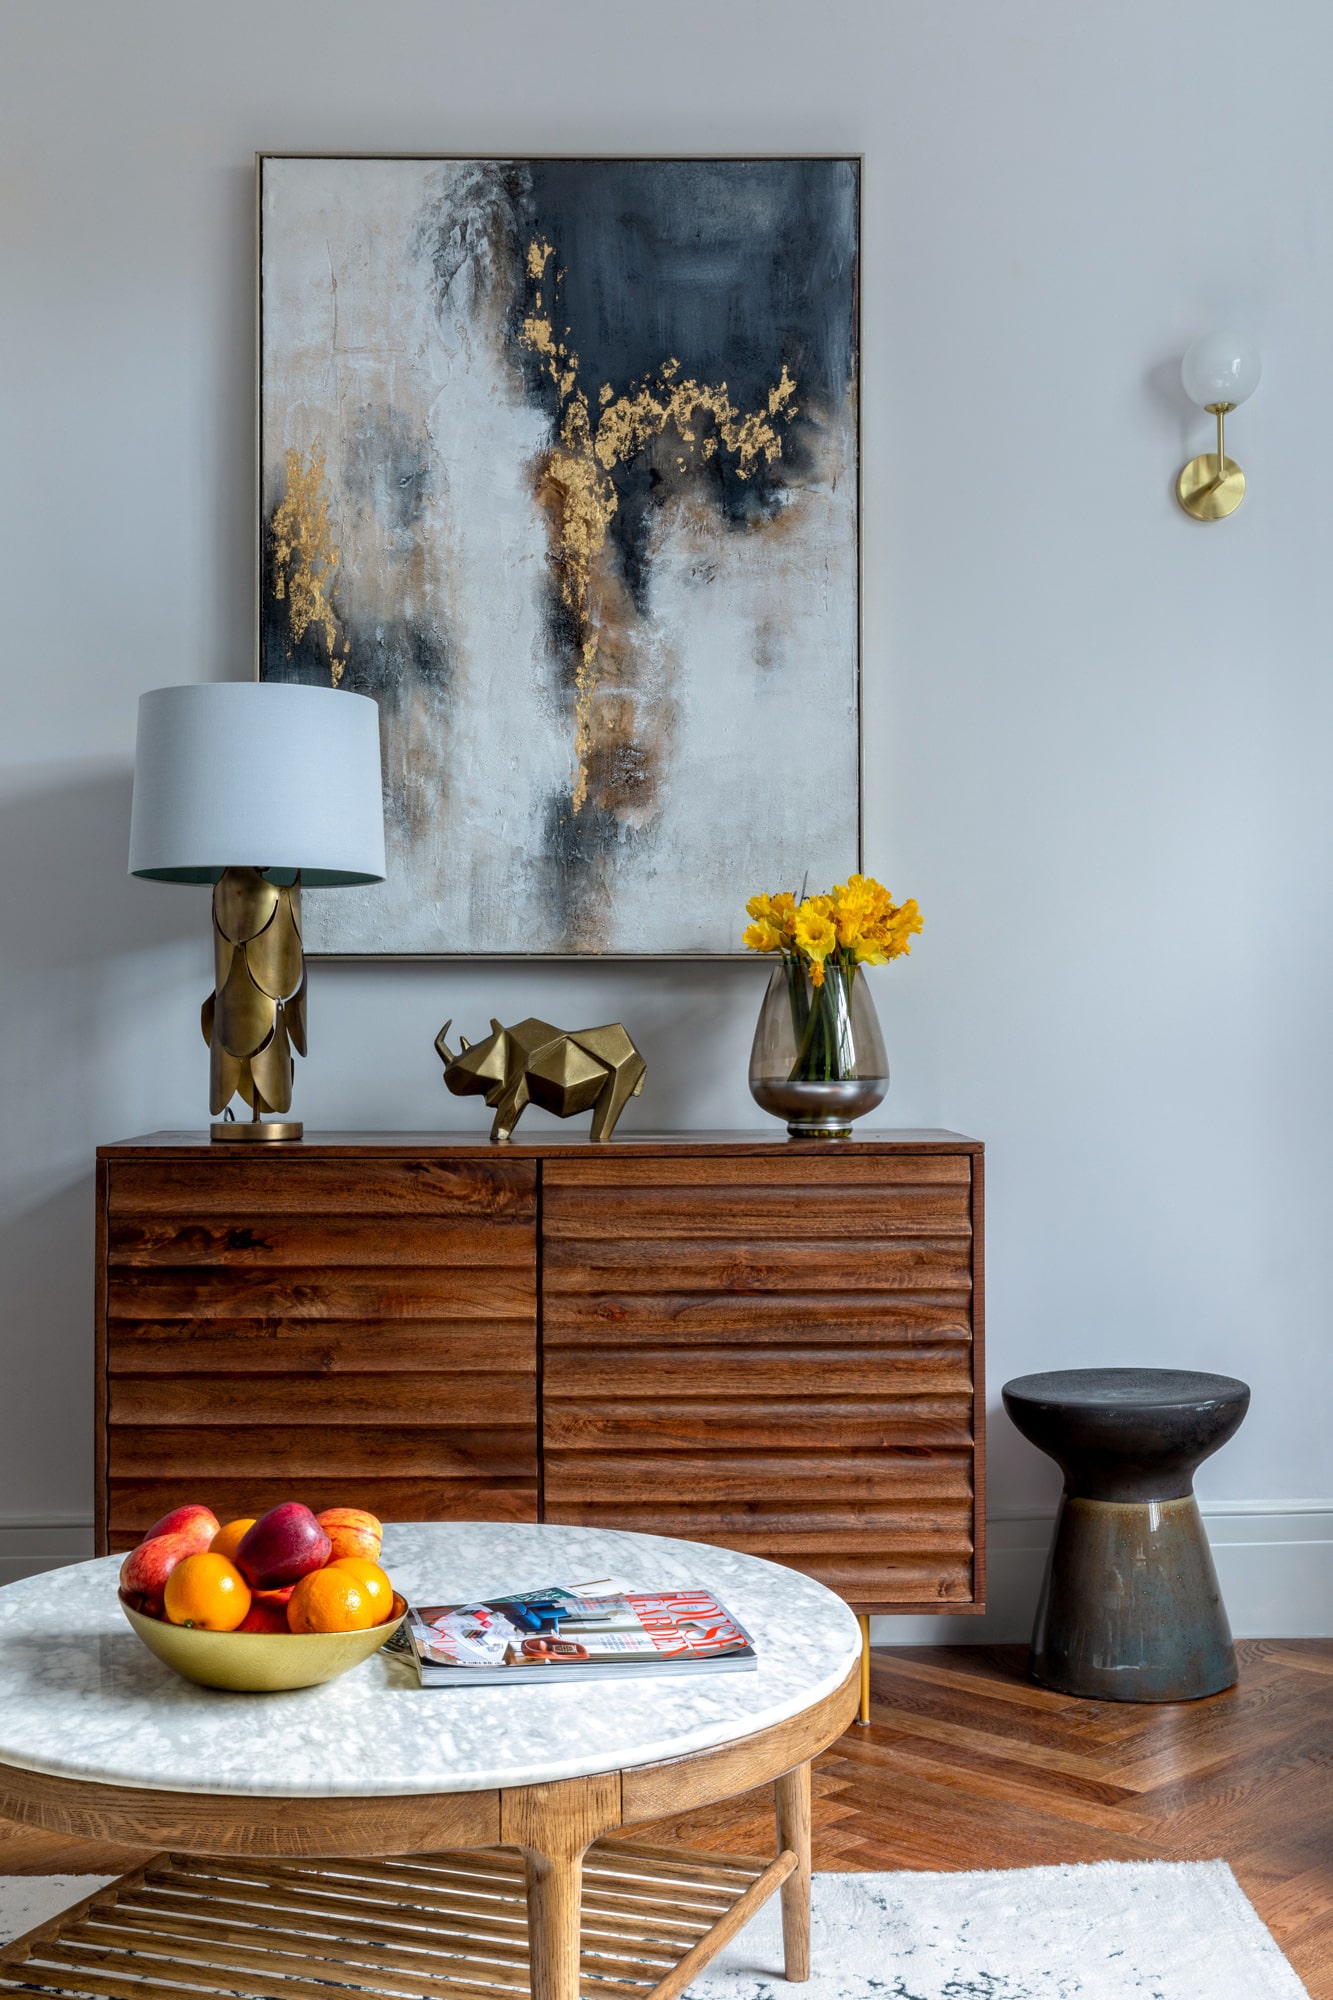 interior detail shot: living room with blue walls, wooden cabinet with lamp and accessories on top; wooden  coffee table with marble top, fruit vase and magazines on it; abstract painting on the wall